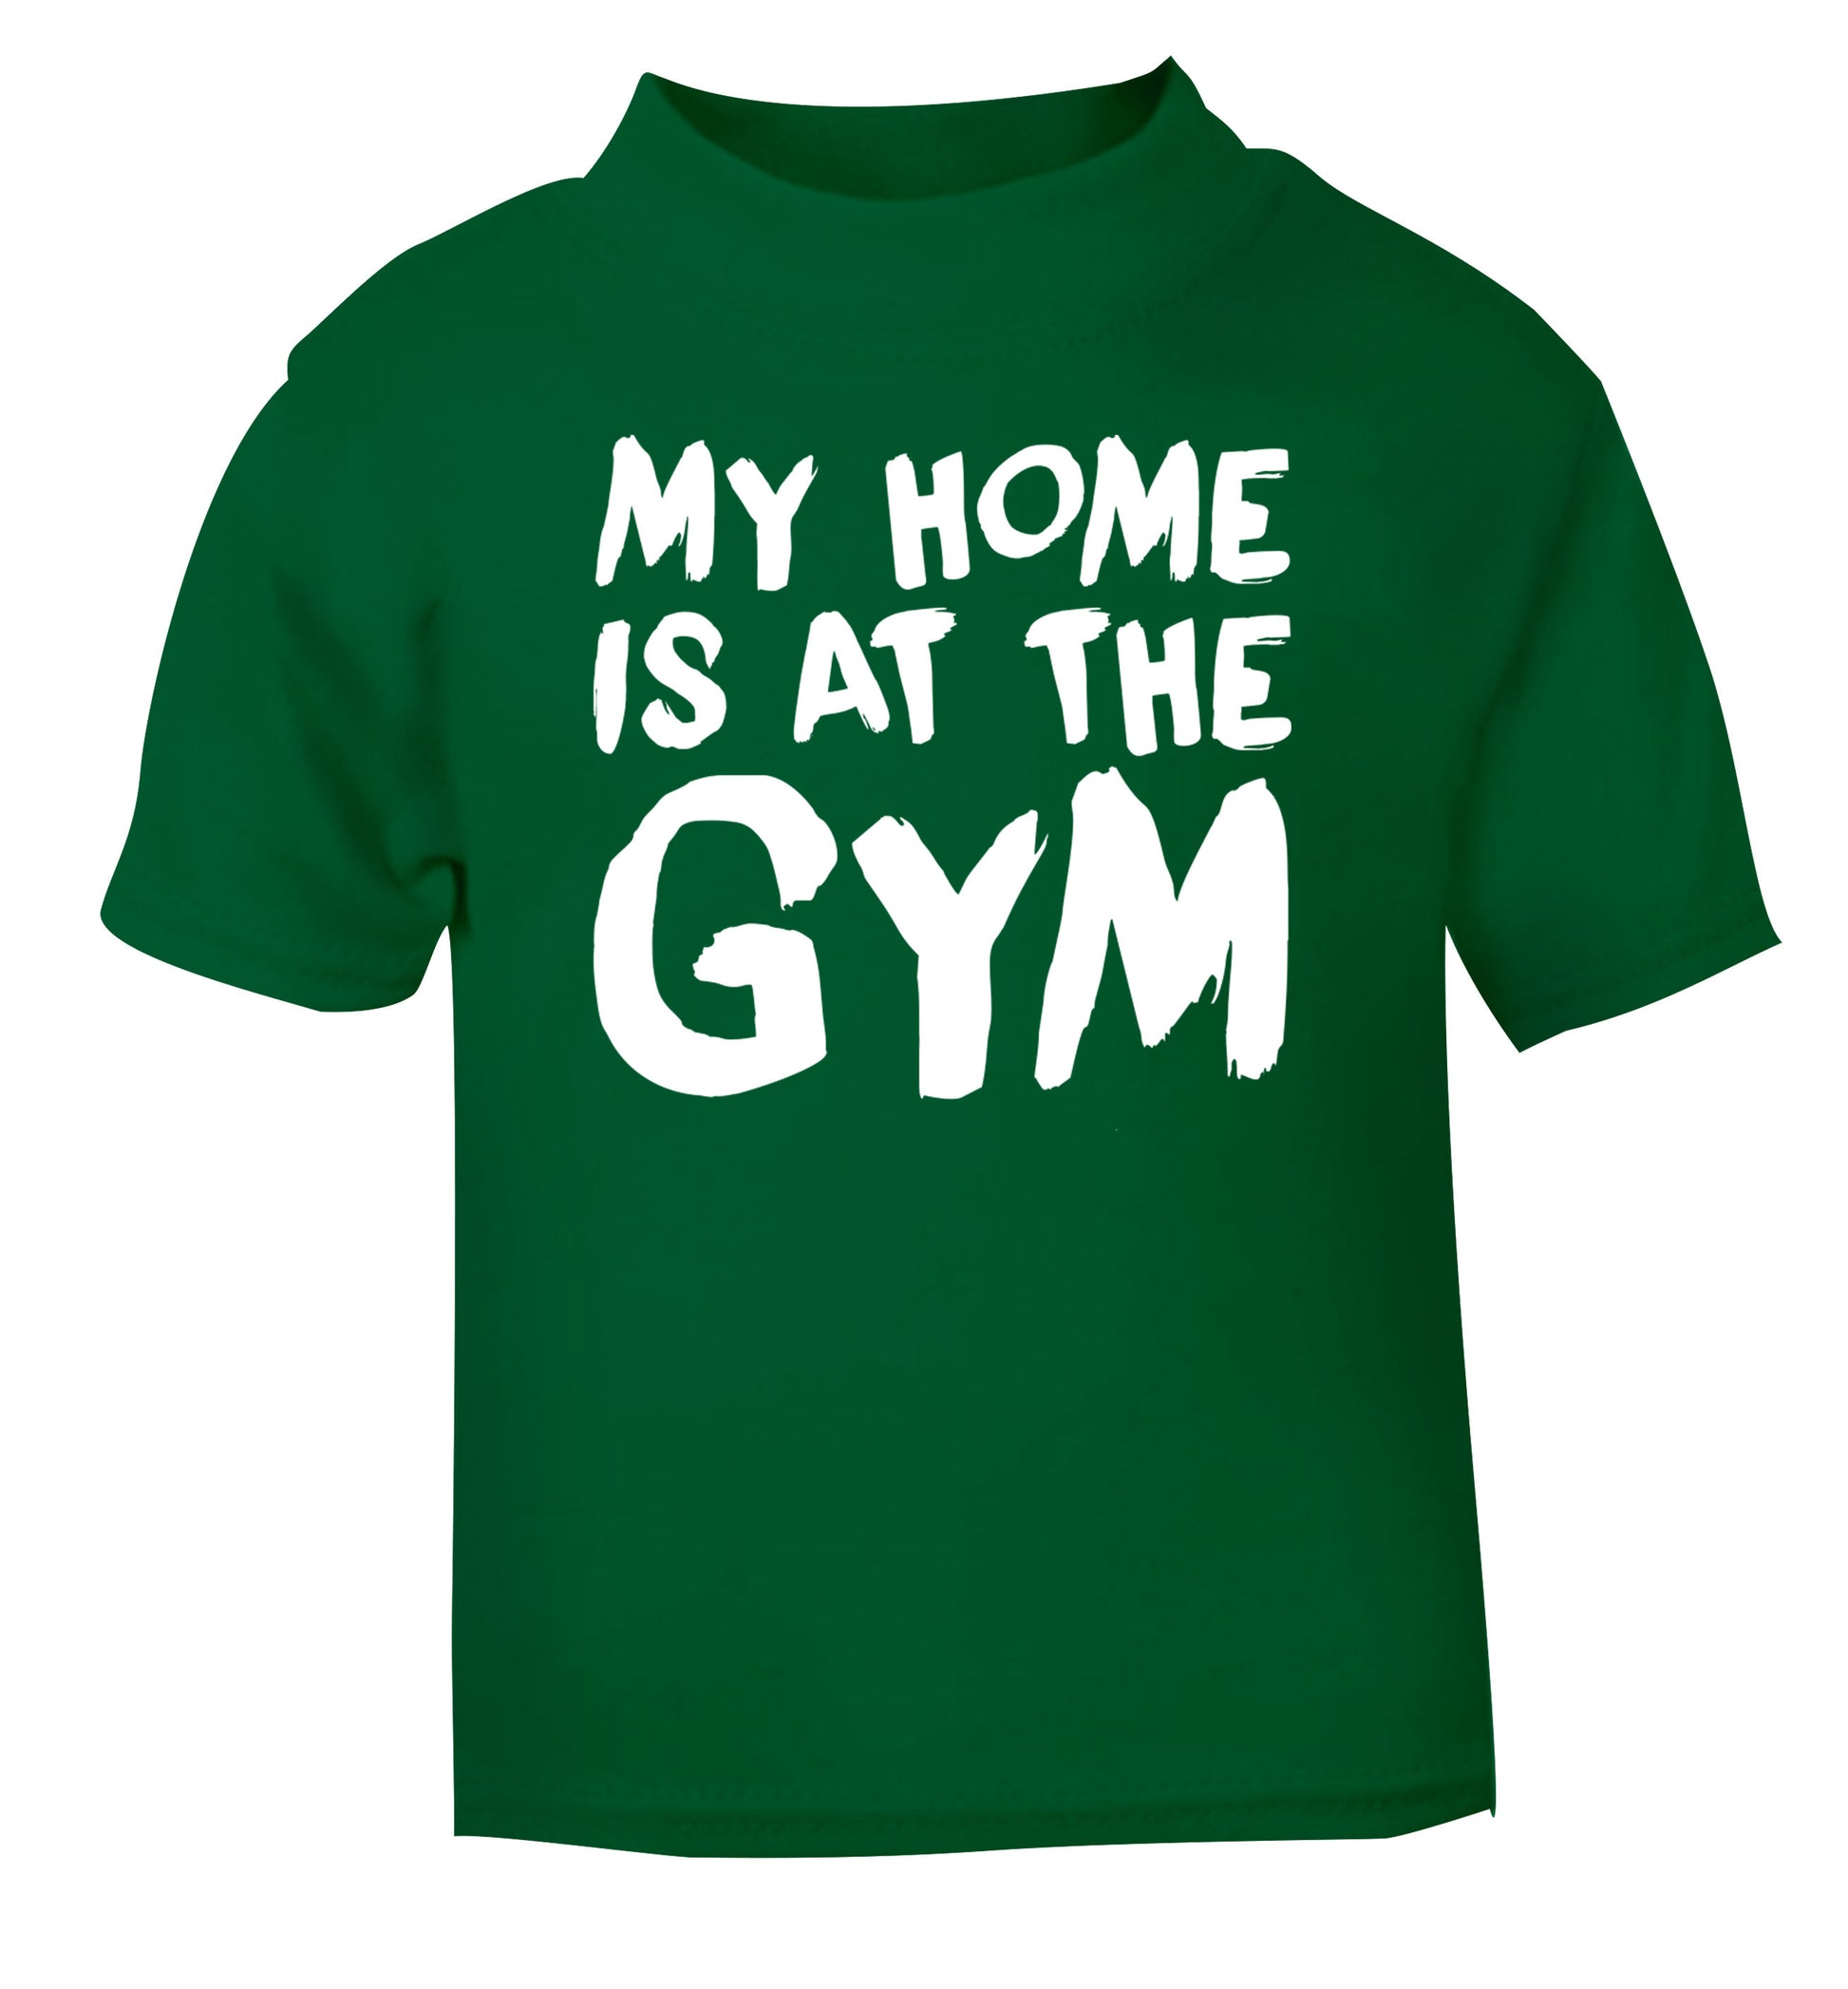 My home is at the gym green Baby Toddler Tshirt 2 Years